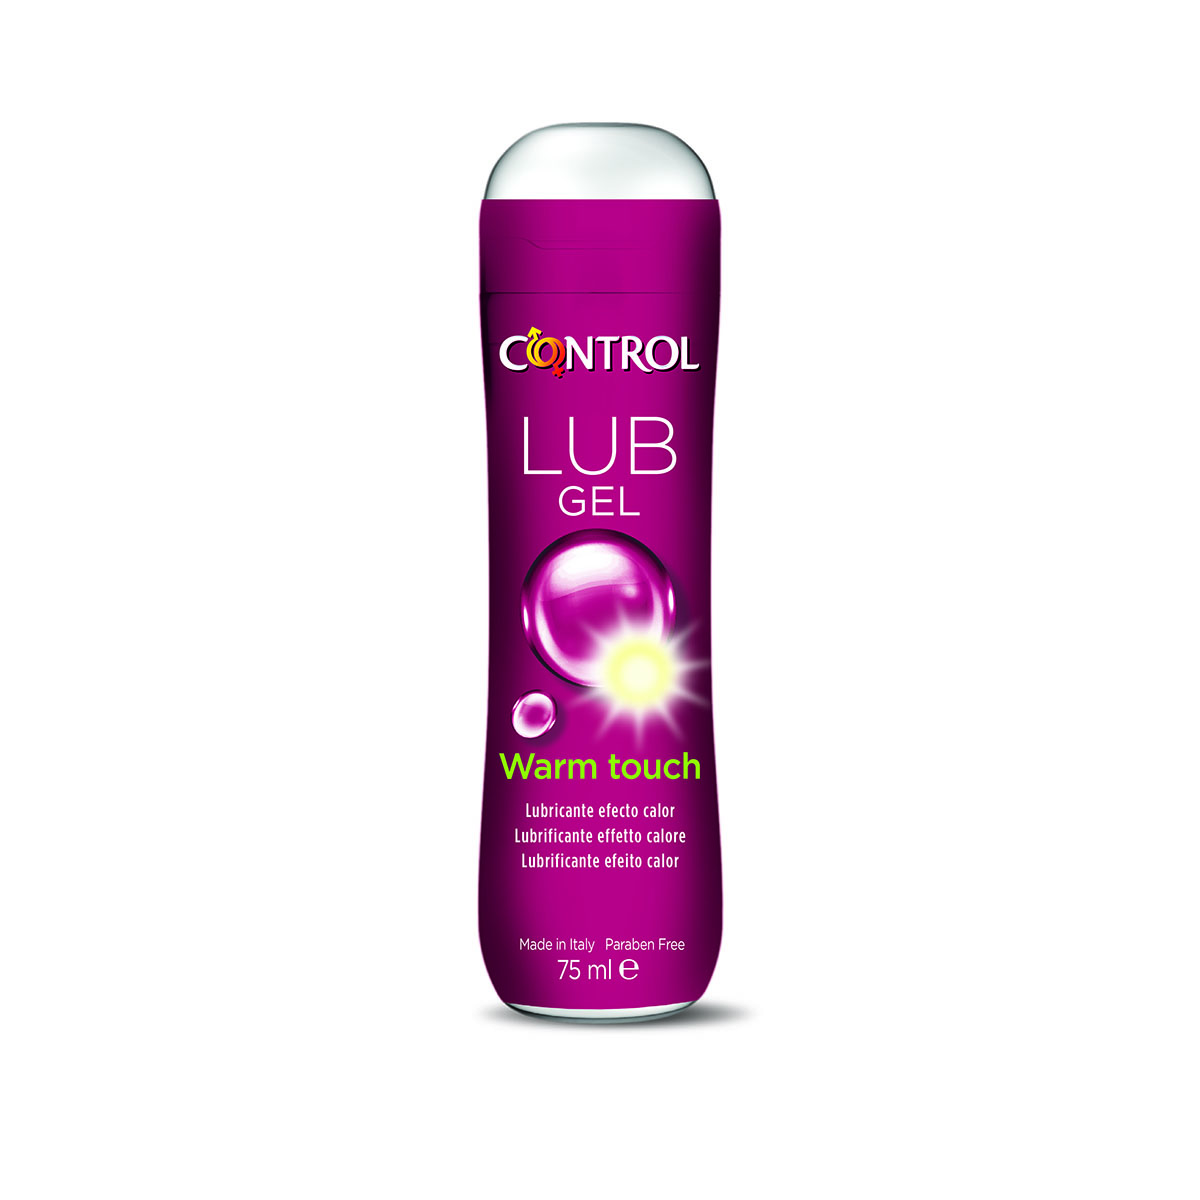 LUBRICANTE CONTROL WARM TOUCH